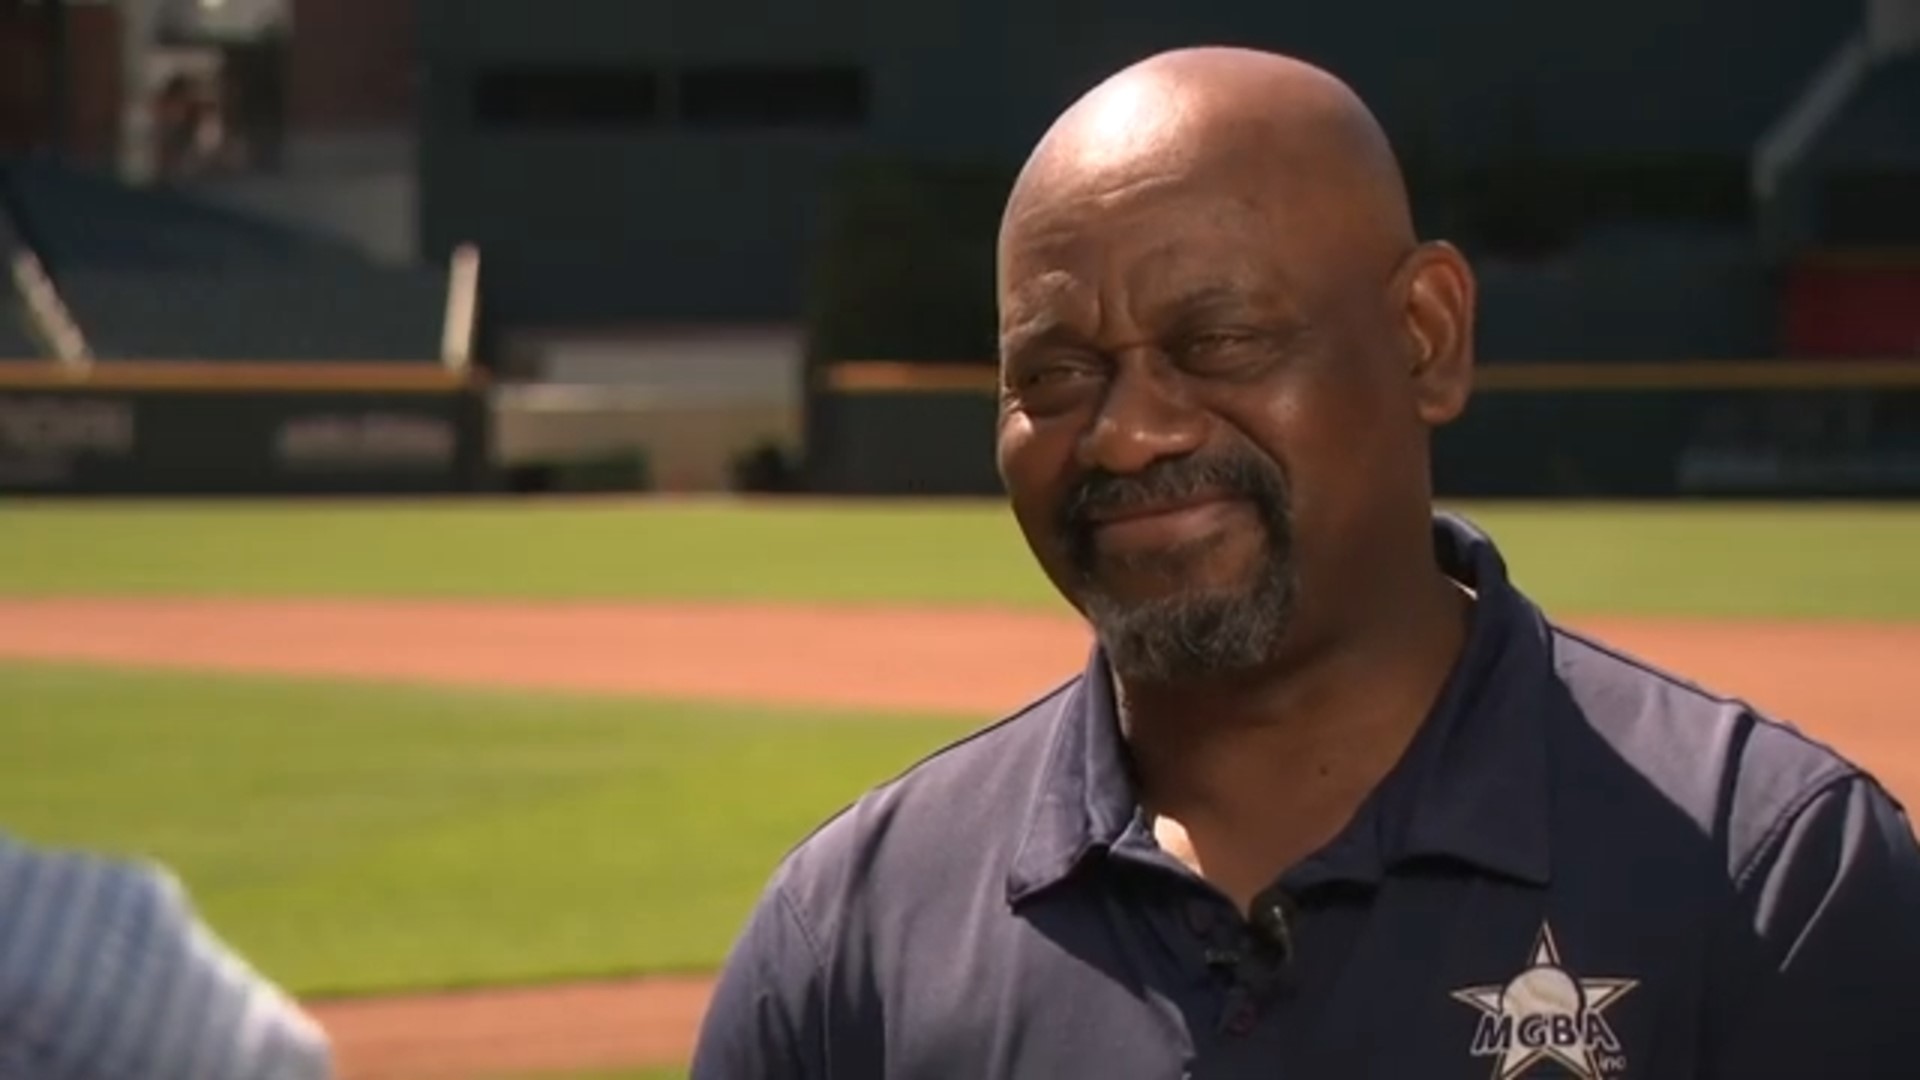 Marquis Grissom, former Braves player from 1995 team that won World Series  shares baseball success